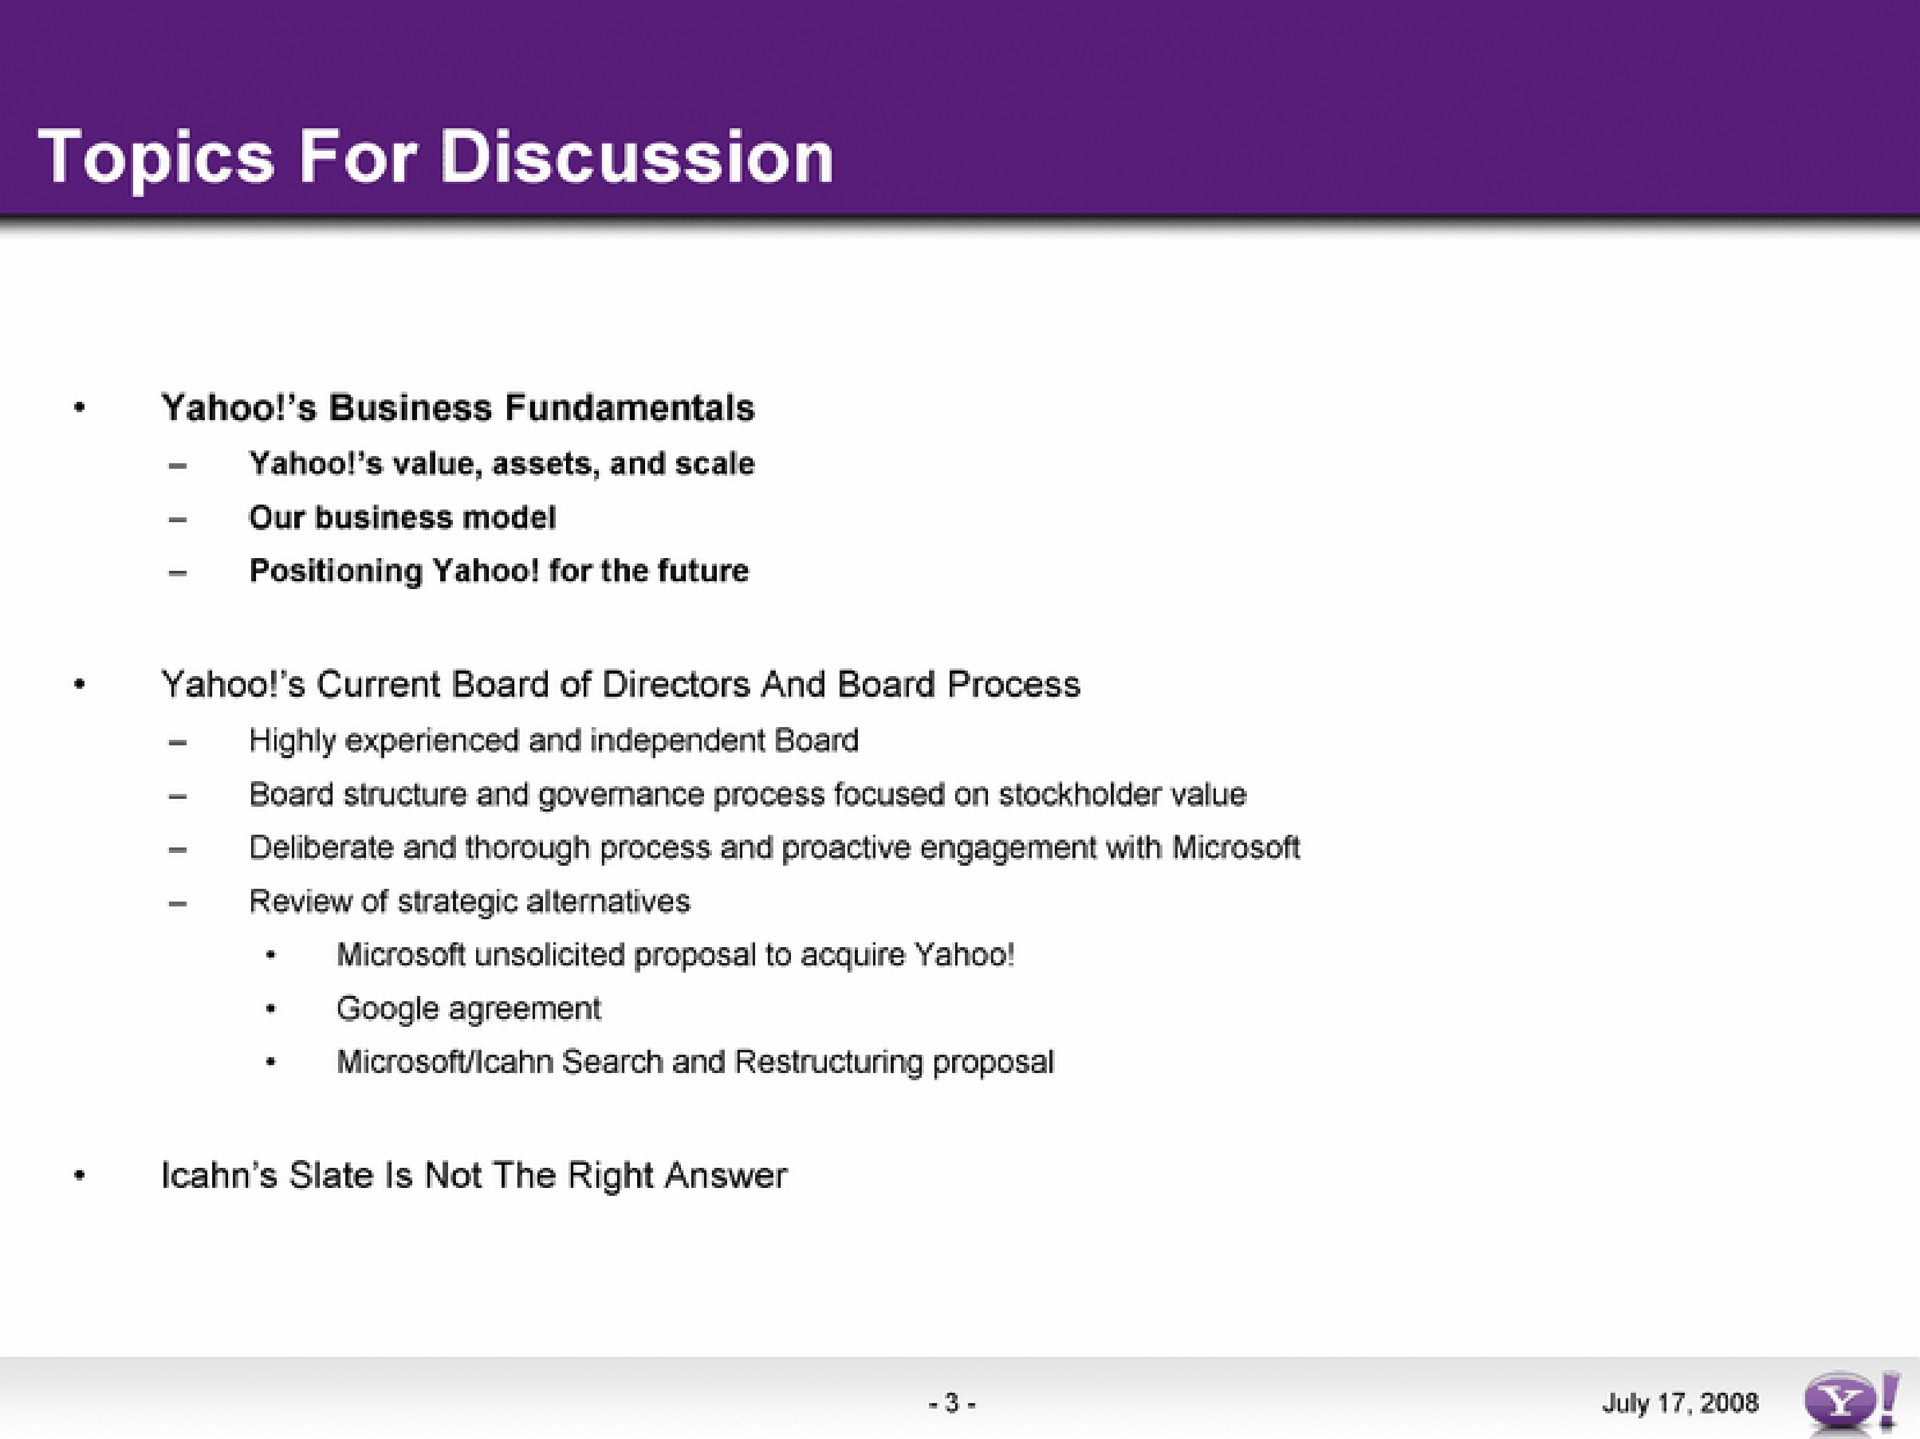 topics for discussion | Yahoo